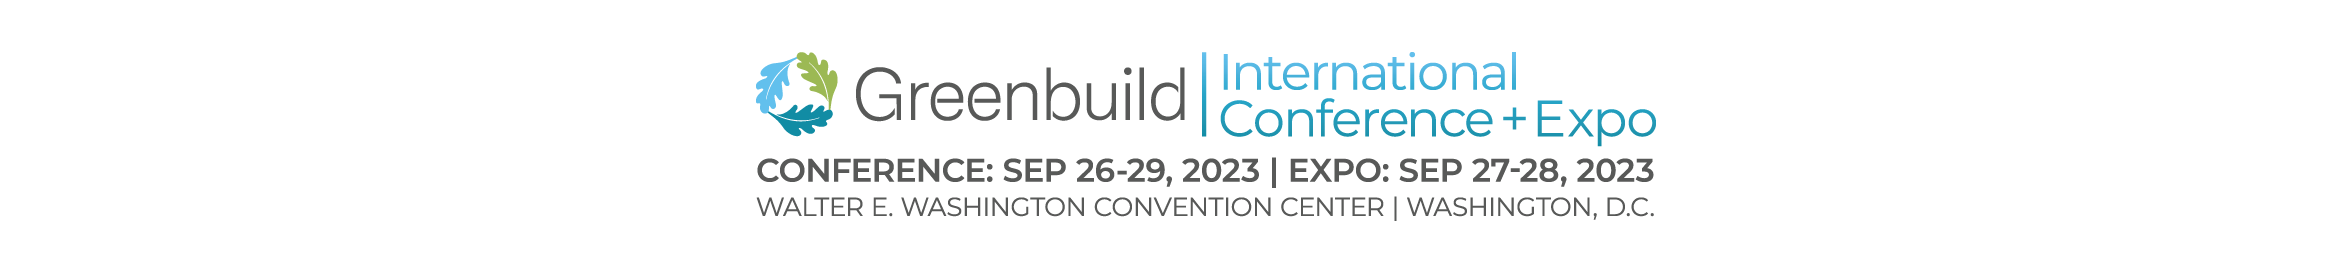 2023 Greenbuild International Conference & Expo Main banner